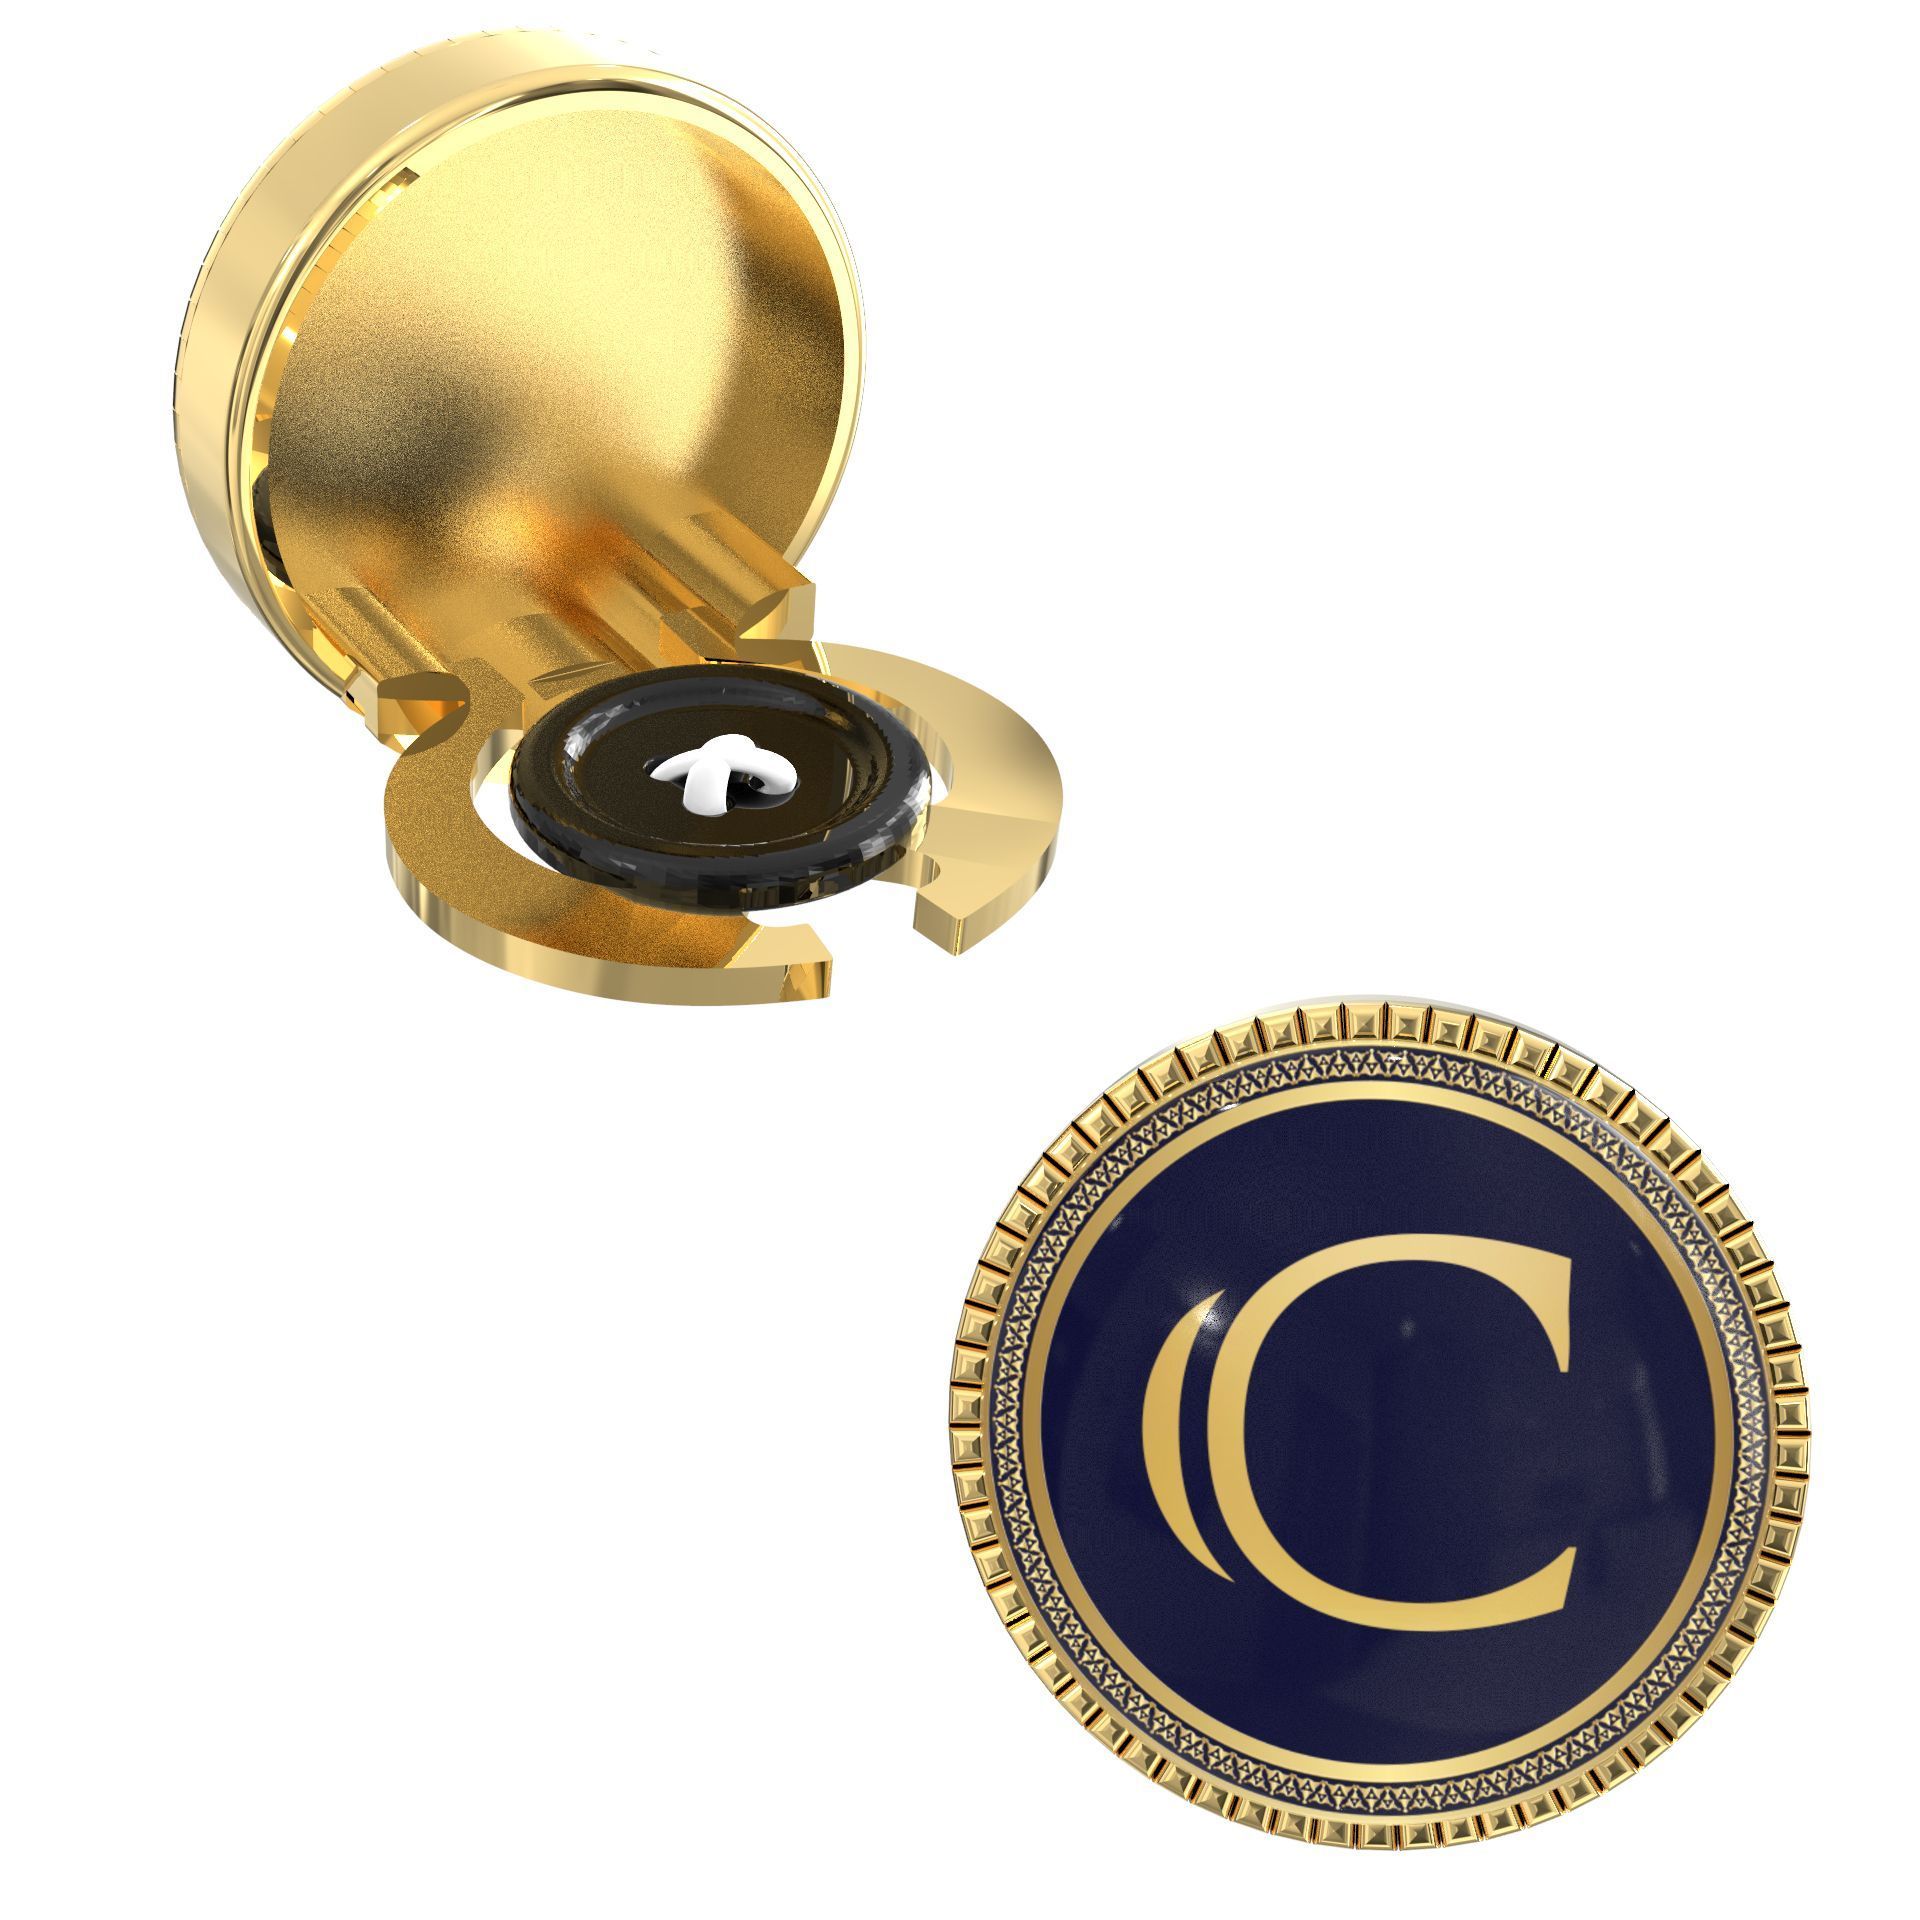 The Smart Buttons - Gold Colour Plated Shirt Button Cover Cufflinks for Men - Personalized Initials - C